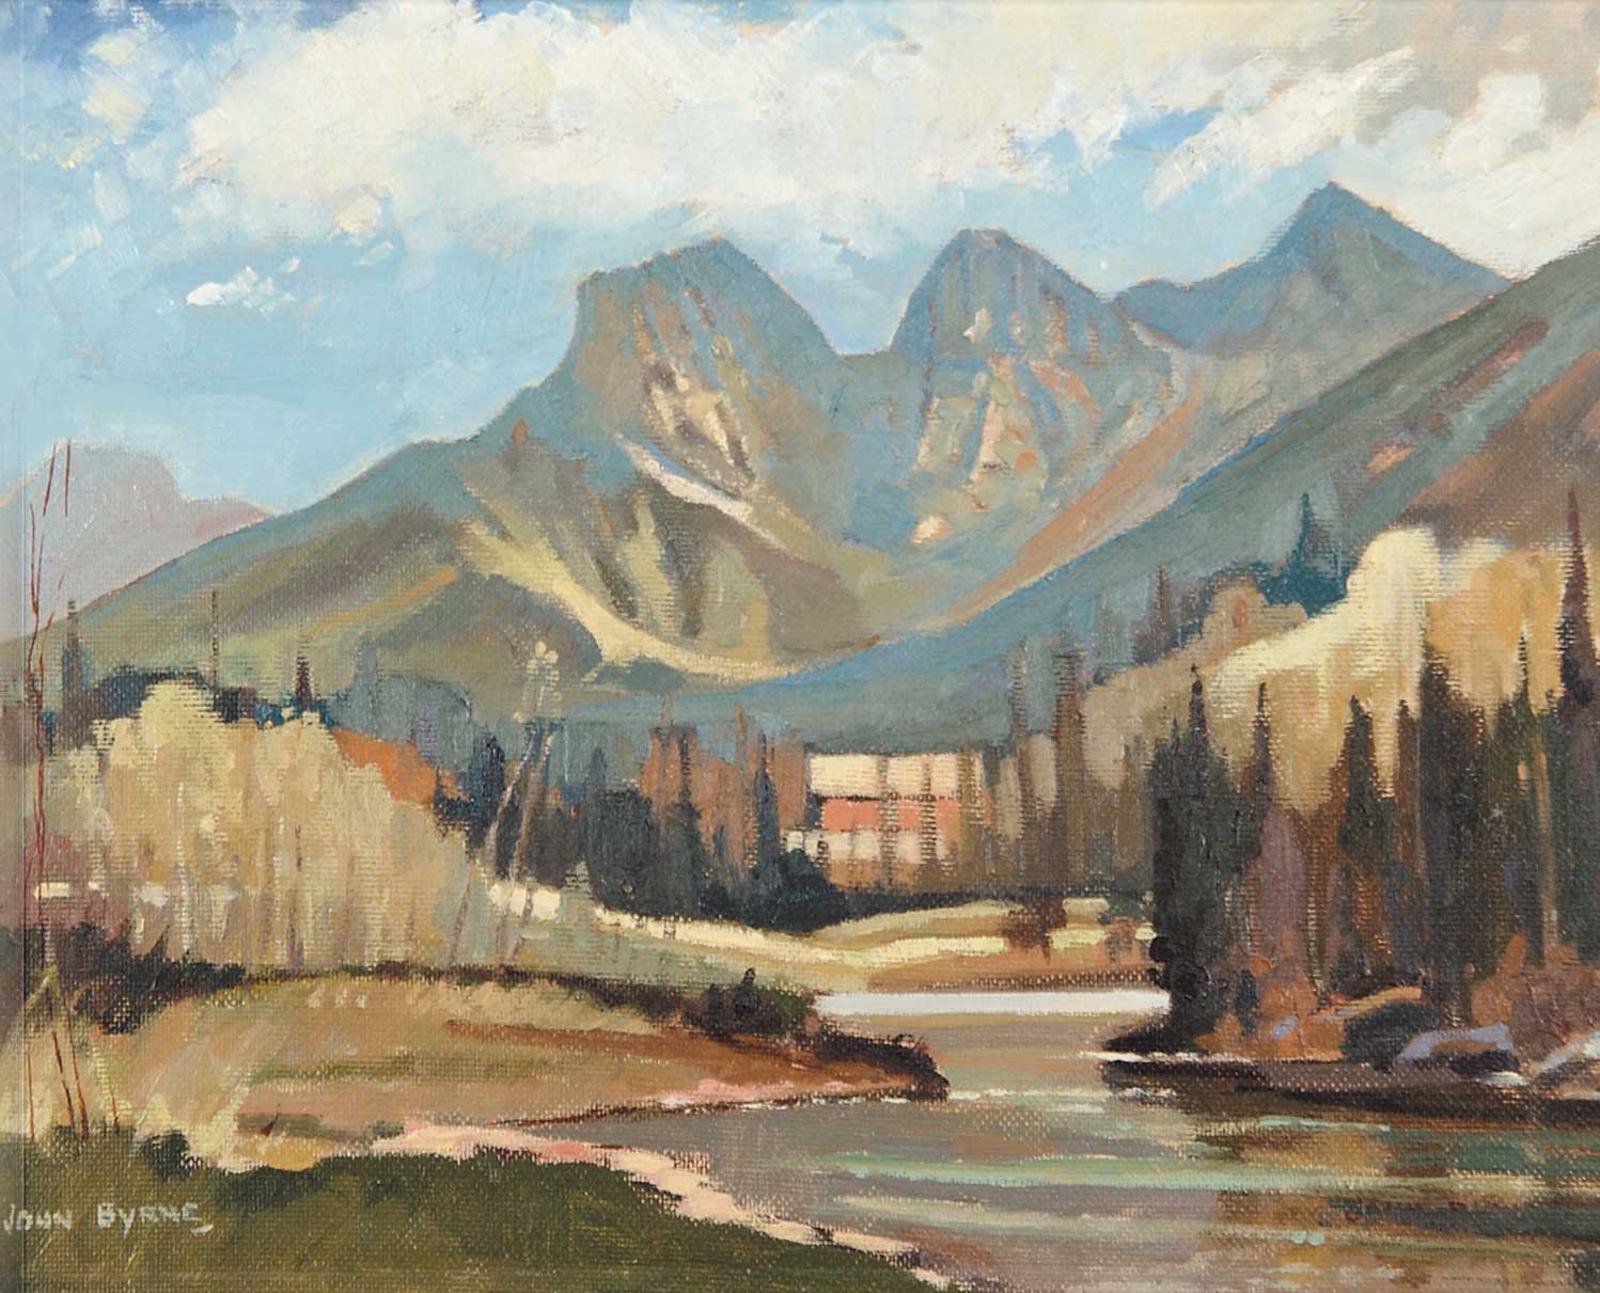 John L. Byrne (1906-1976) - 3 Sisters, Canmore